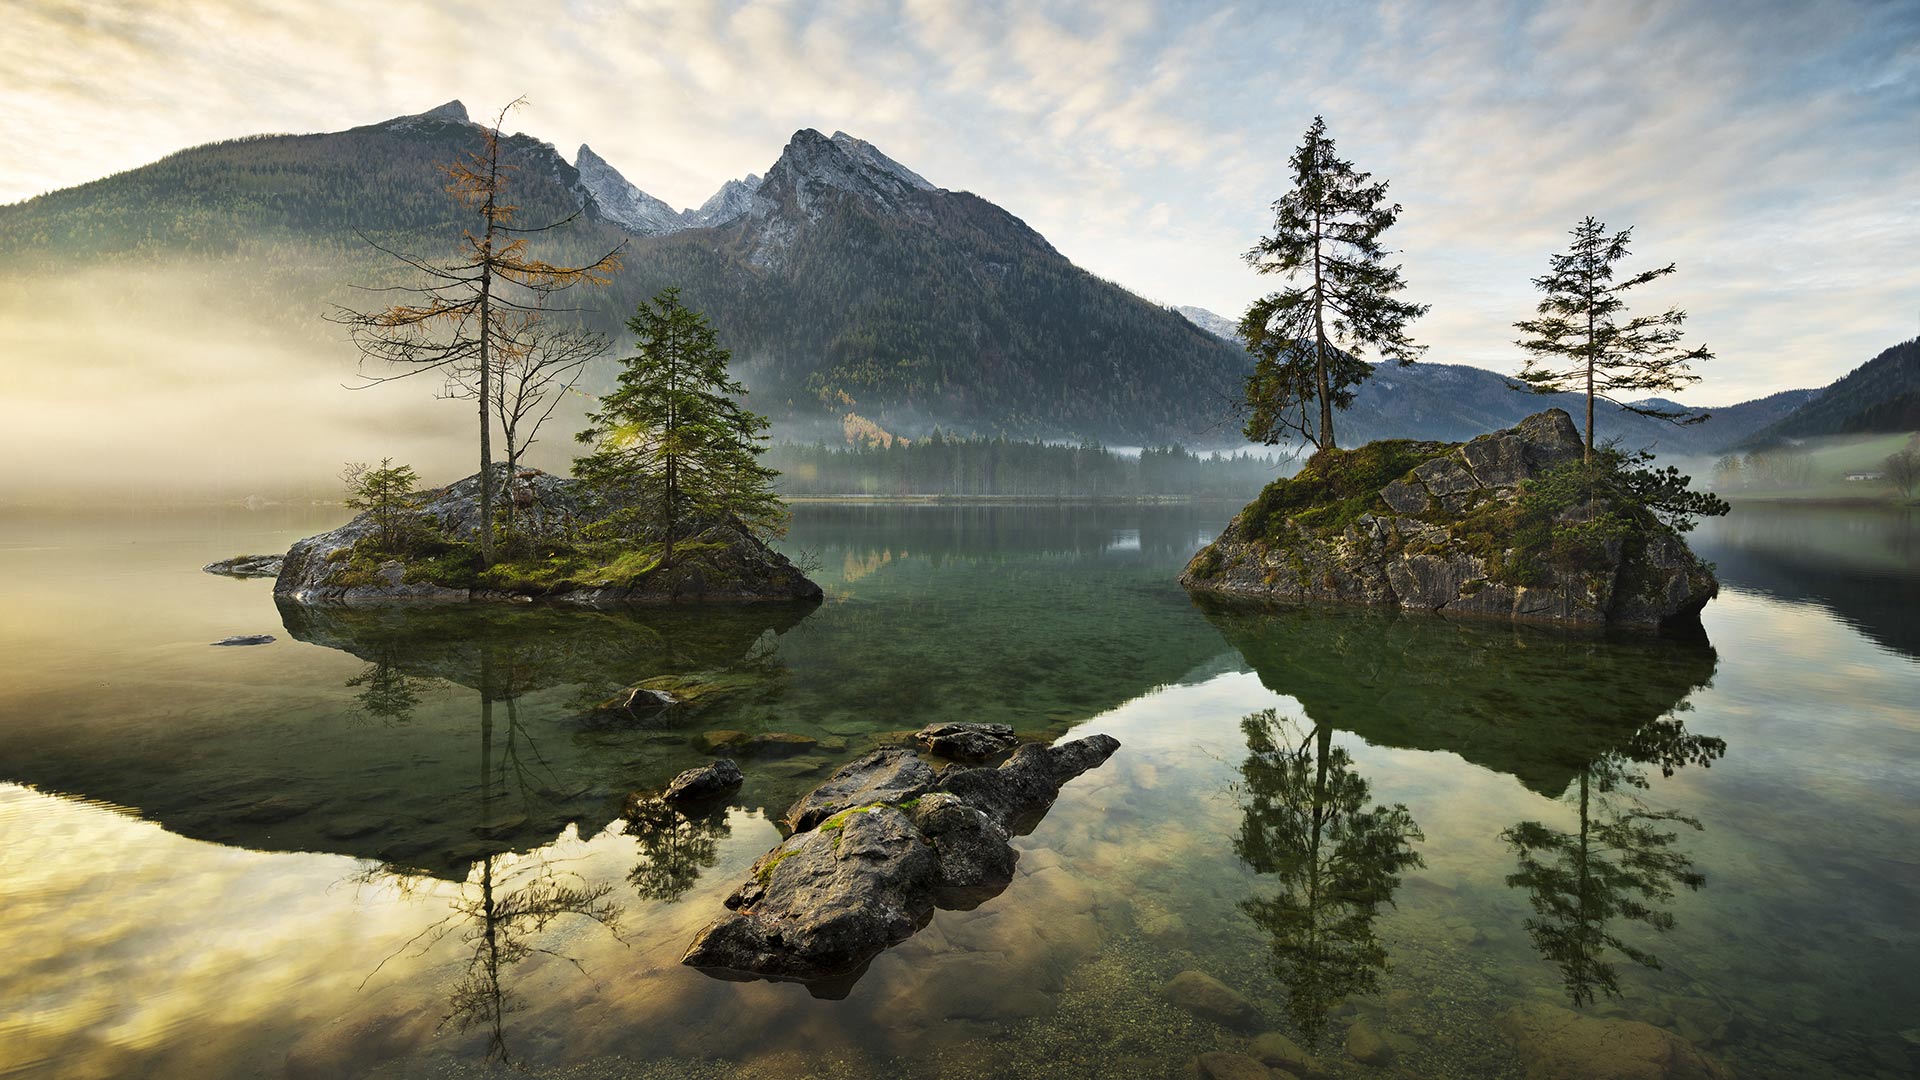 Landscape Nature Lake Clear Water Reflection Rocks Trees Mountains Mist Sky Clouds Bing 1920x1080